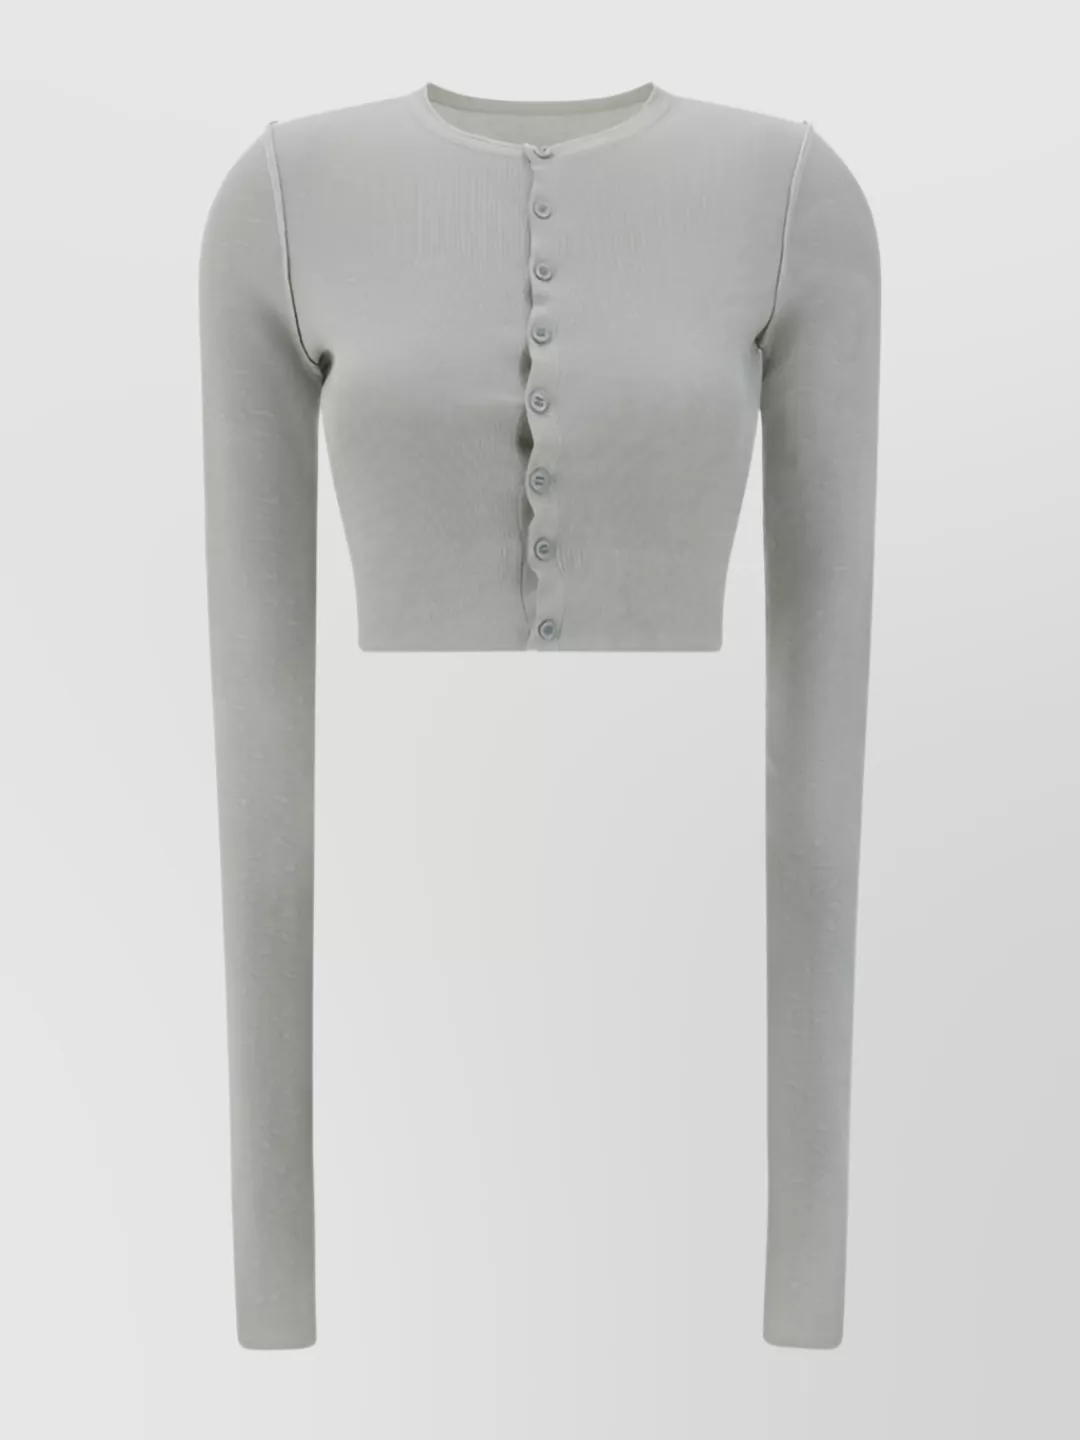 Mm6 Maison Margiela Cropped Ribbed Cardigan With Extra Long Sleeves In Gray